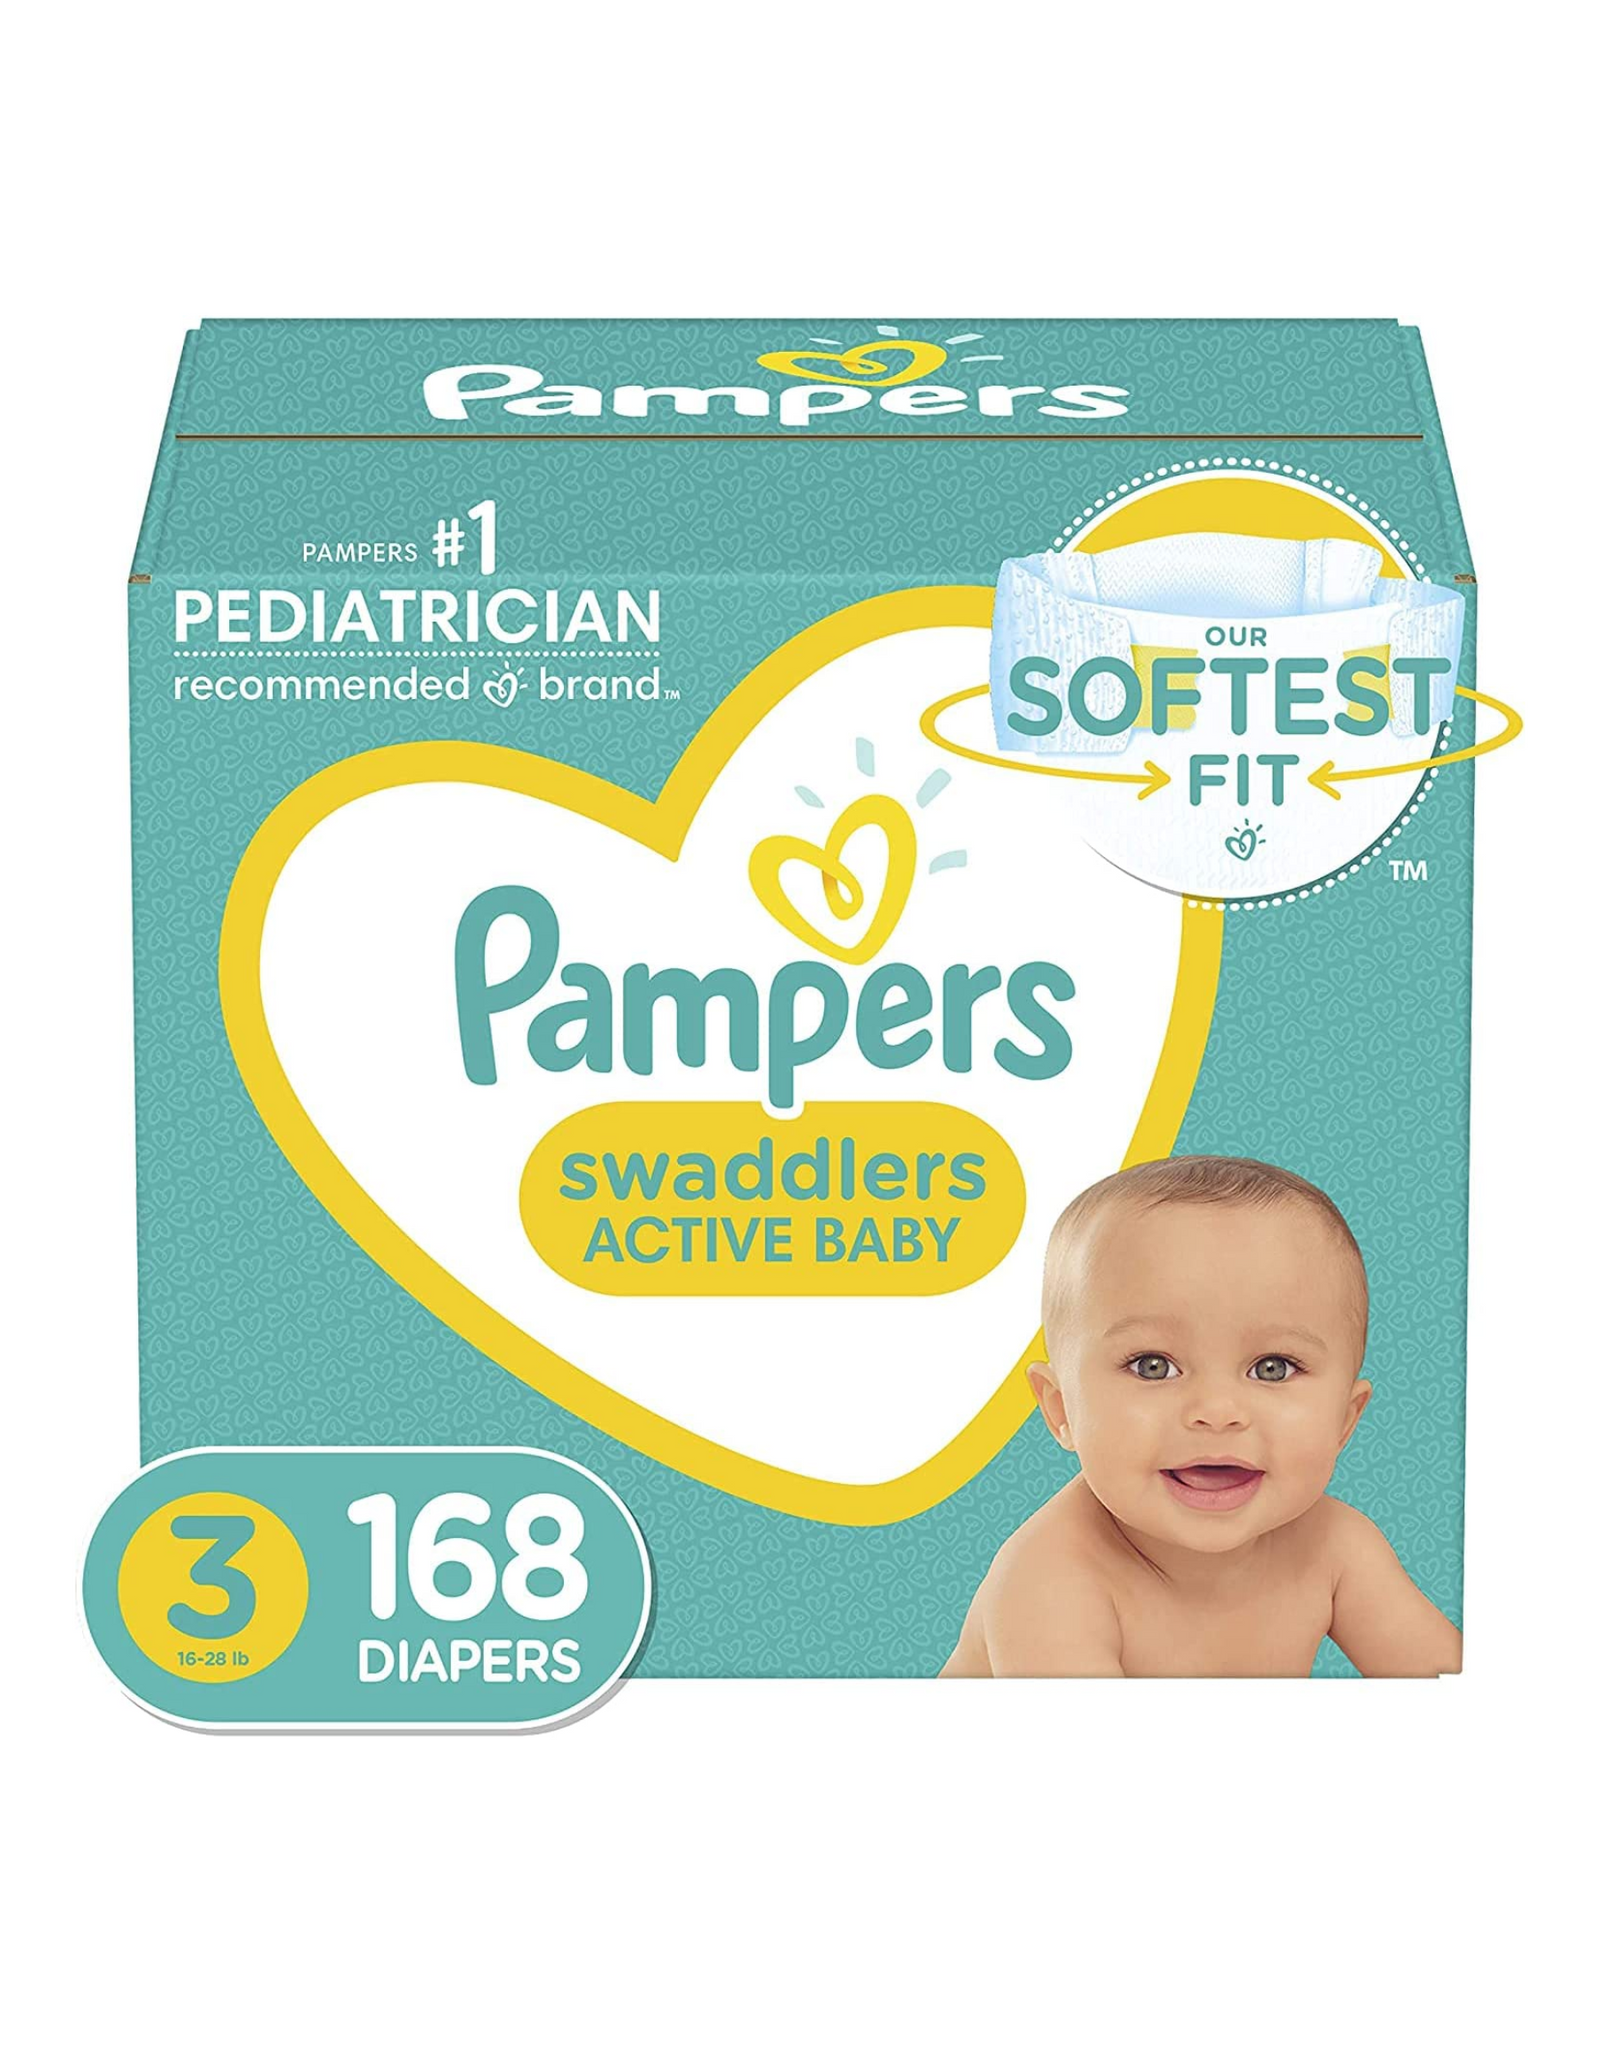 Diapers Size 3, 168 Count - Pampers Swaddlers Baby Diapers, One Month Supply (Packaging May Vary)